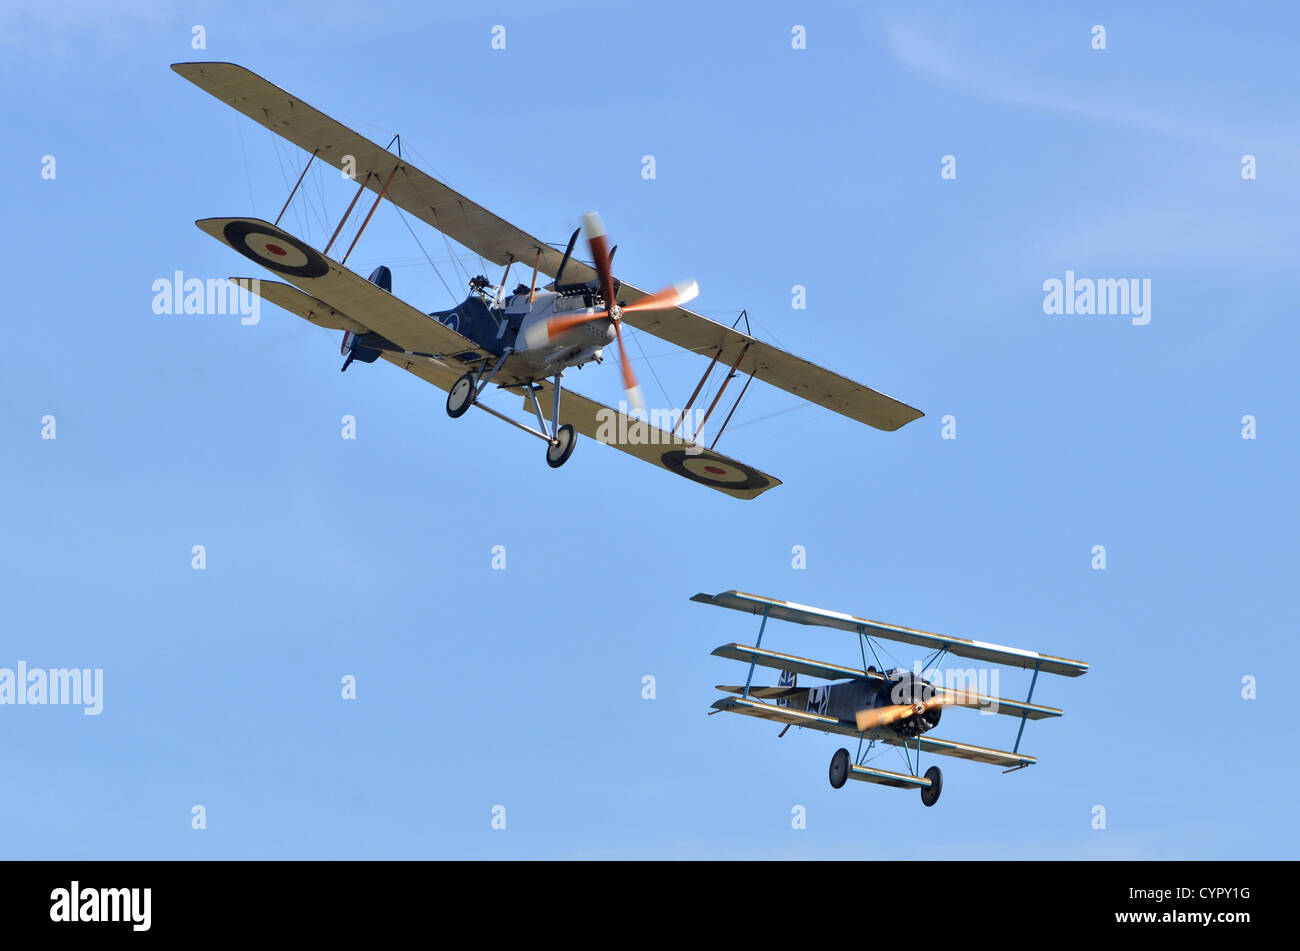 WW1 plane dogfight simulation with R.E.8 in RAF markings and Fokker DR-1 Triplane in German Air Force markings,Duxford Airshow, UK. Stock Photo